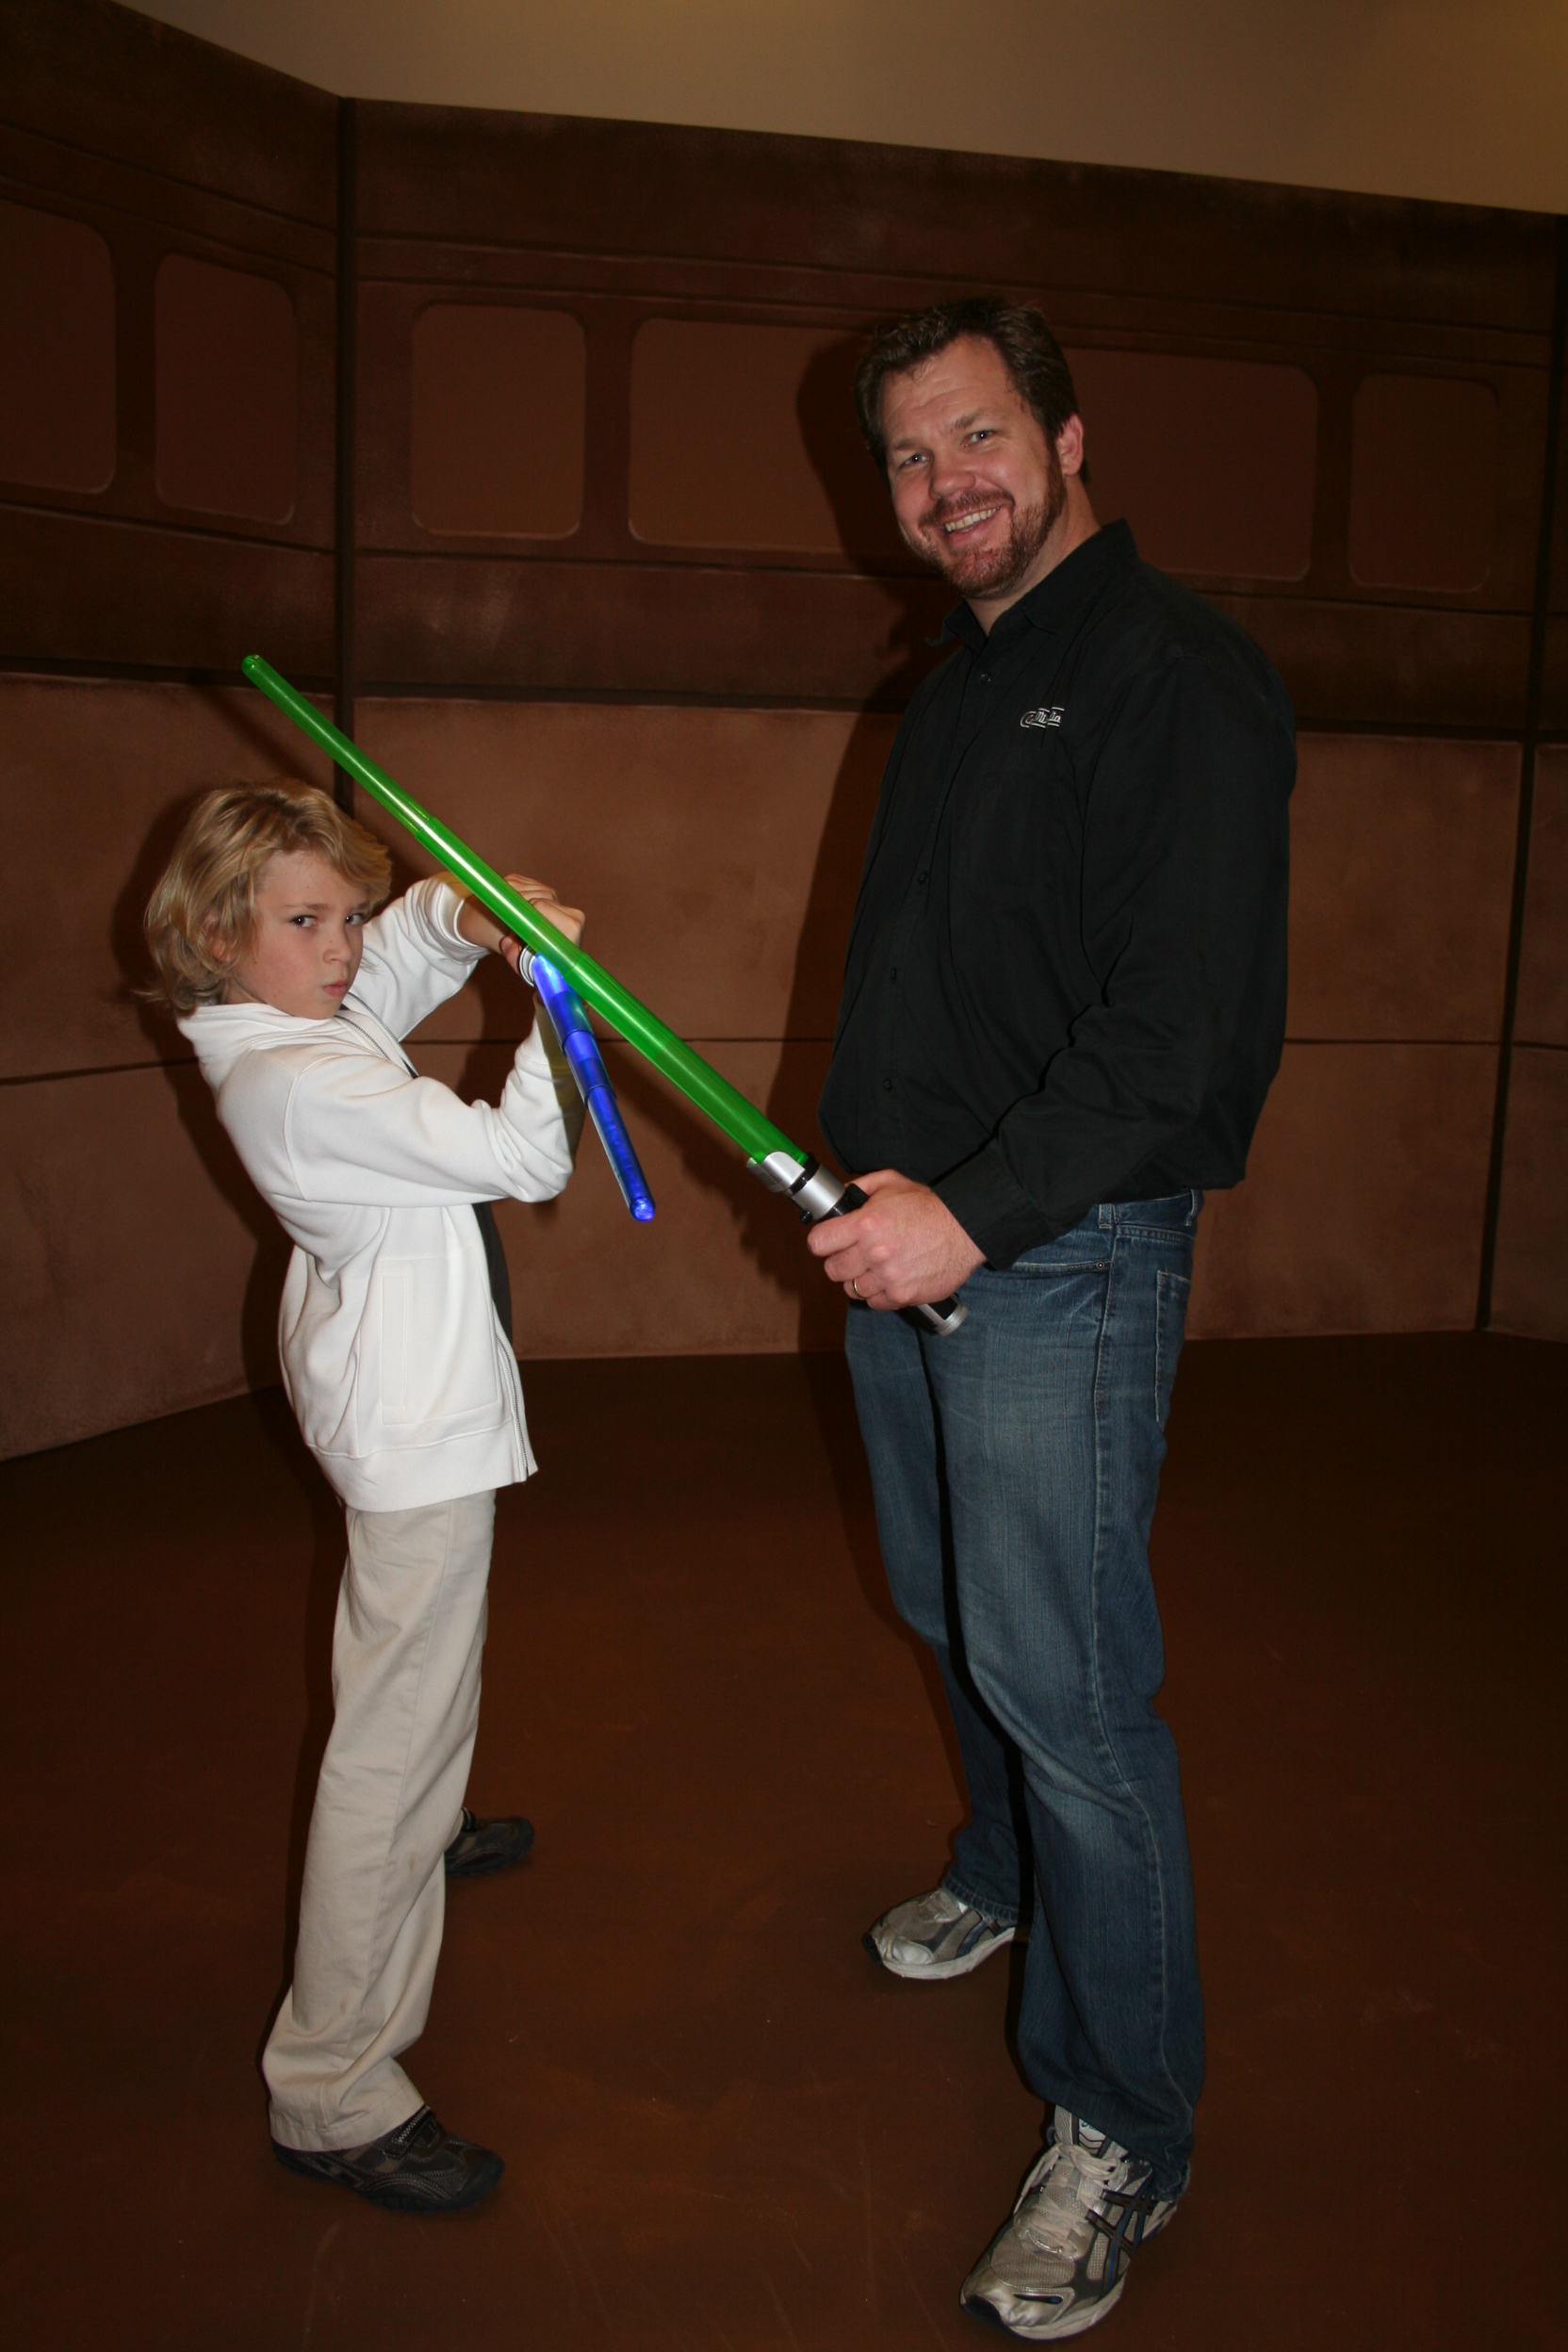 Will Meyers and Director Hayes McCarthy on the HASBRO set filming a Star Wars the Clone Wars Electronic Light Saber commercial (Nov 2009)